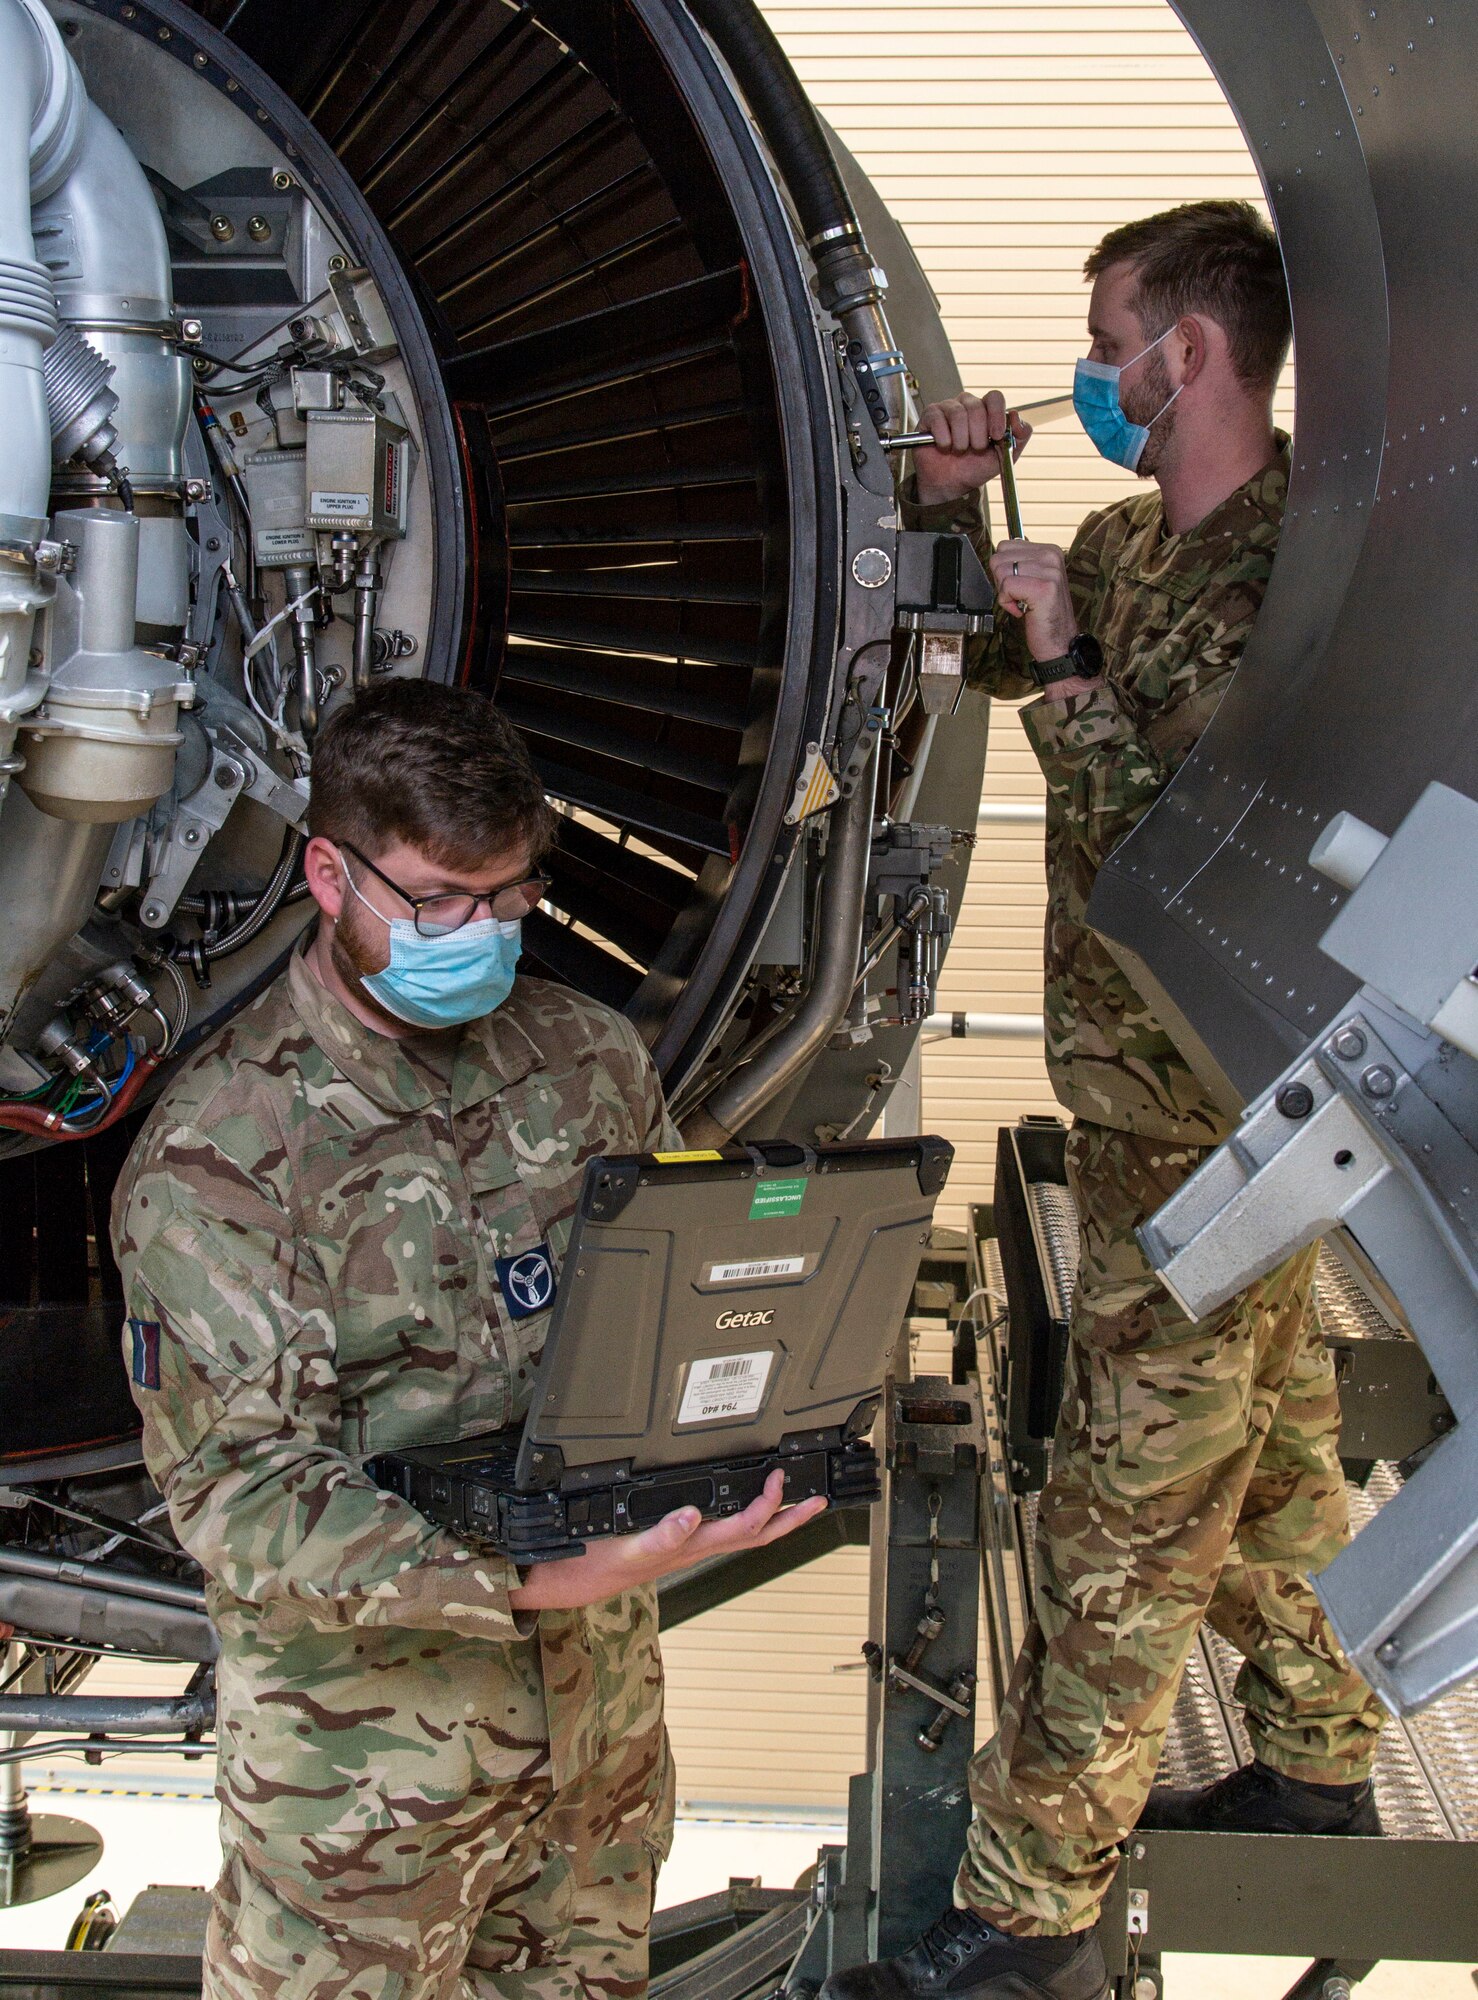 Royal Air Force Senior Aircraftman Technician Joseph Eastham, reads technical orders from a laptop as RAF Cpl. Ben Archer removes a bolt from a C-17 engine trainer at Dover Air Force Base, Delaware, Feb. 15, 2022. Eastham and Archer, both C-17 Globemaster maintainers from 99 Squadron, RAF Brize Norton, United Kingdom, attended the 64-hour C-17 Engine Change course where they learned how to safely remove and reinstall the Pratt & Whitney F117-PW-100 turbofan engine. (U.S. Air Force photo by Roland Balik)